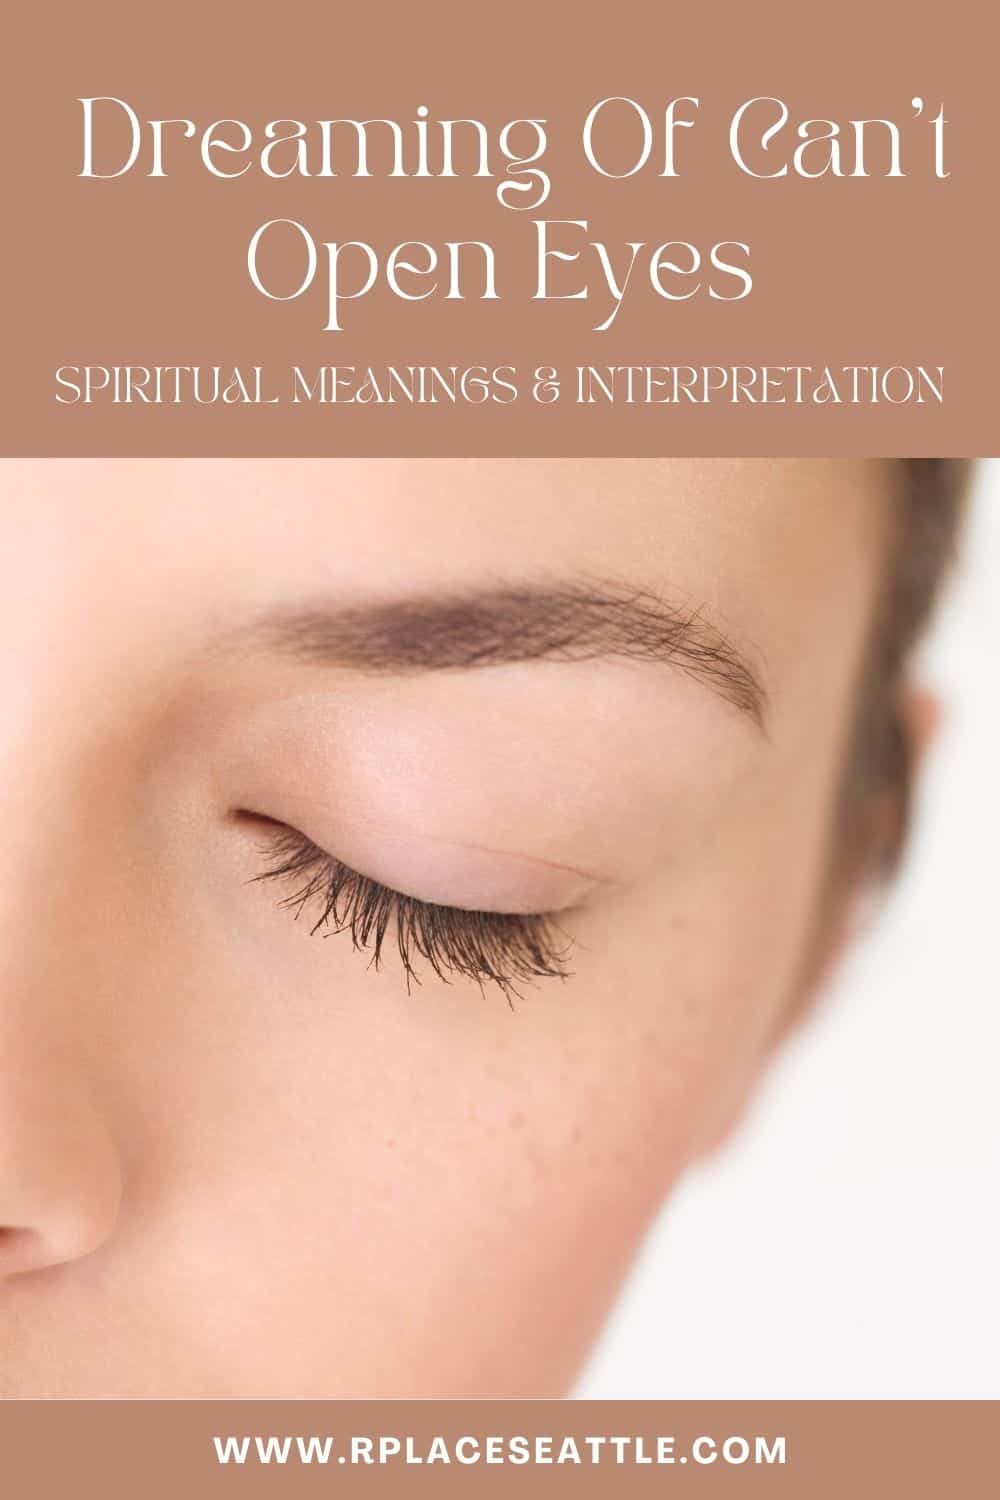 Dreaming Of Can't Open Eyes (Spiritual Meanings & Interpretation)